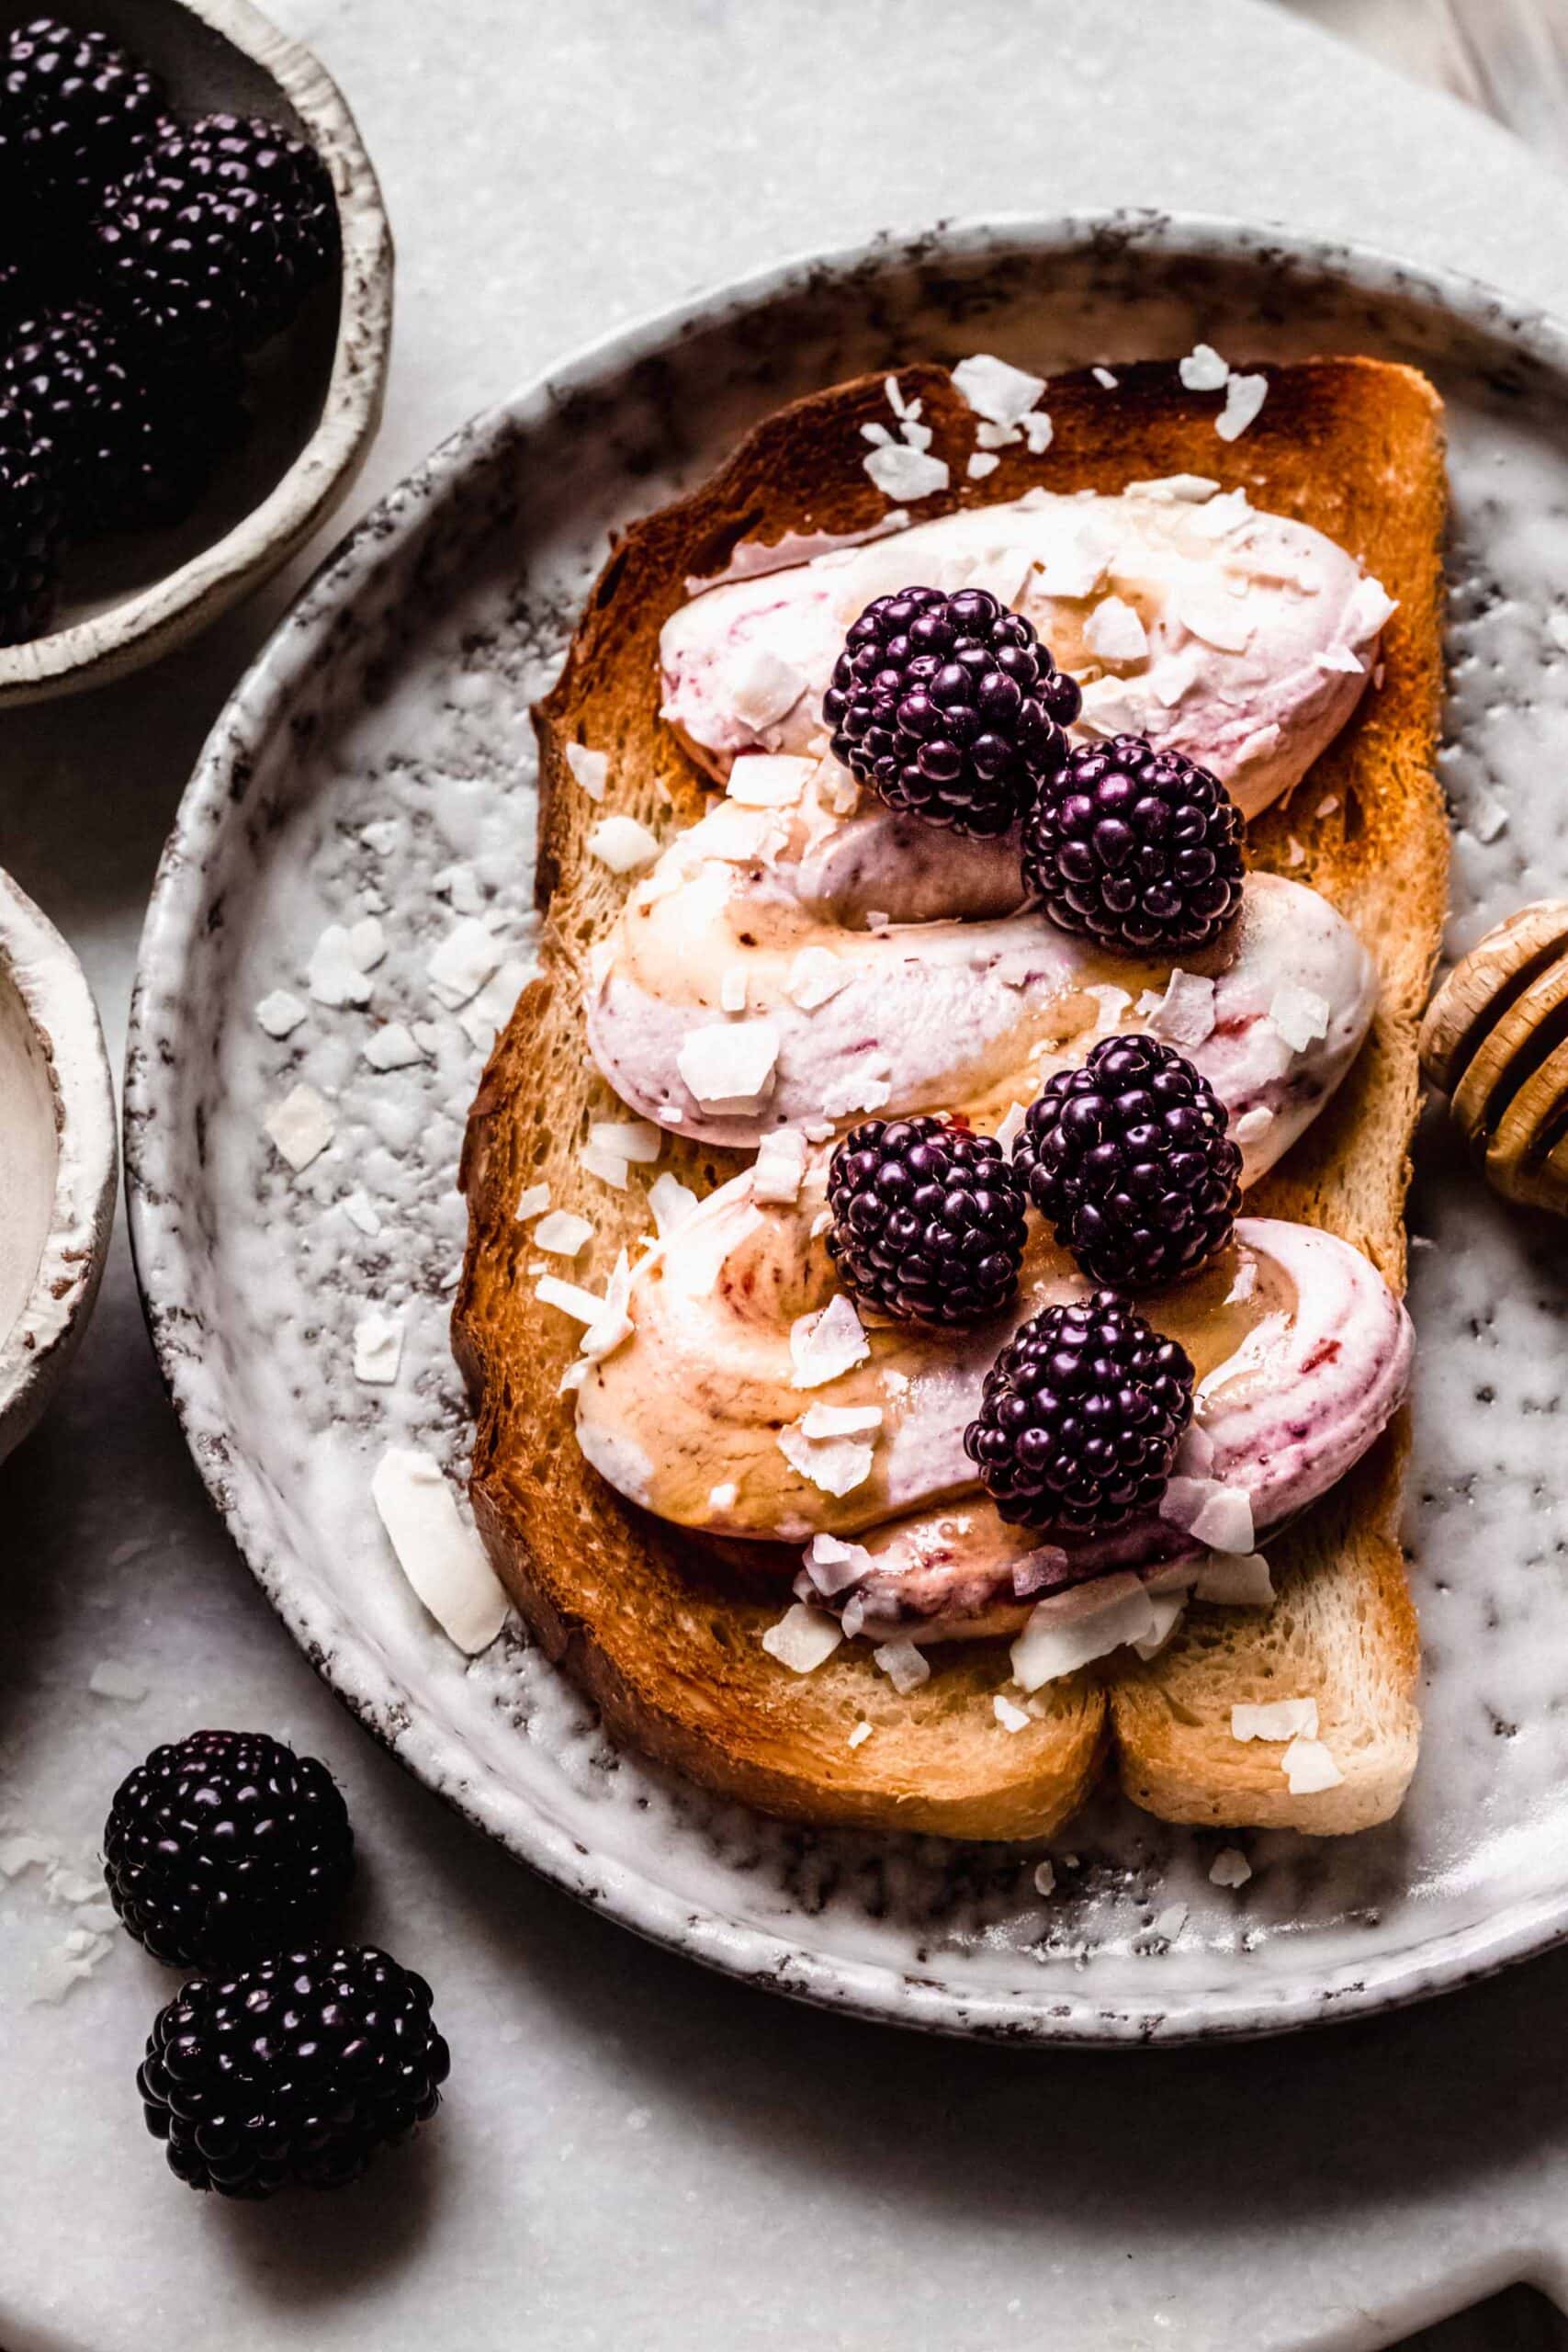 Toast on grey plate with swirl of ricotta cheese, drizzle of honey and blackberries.